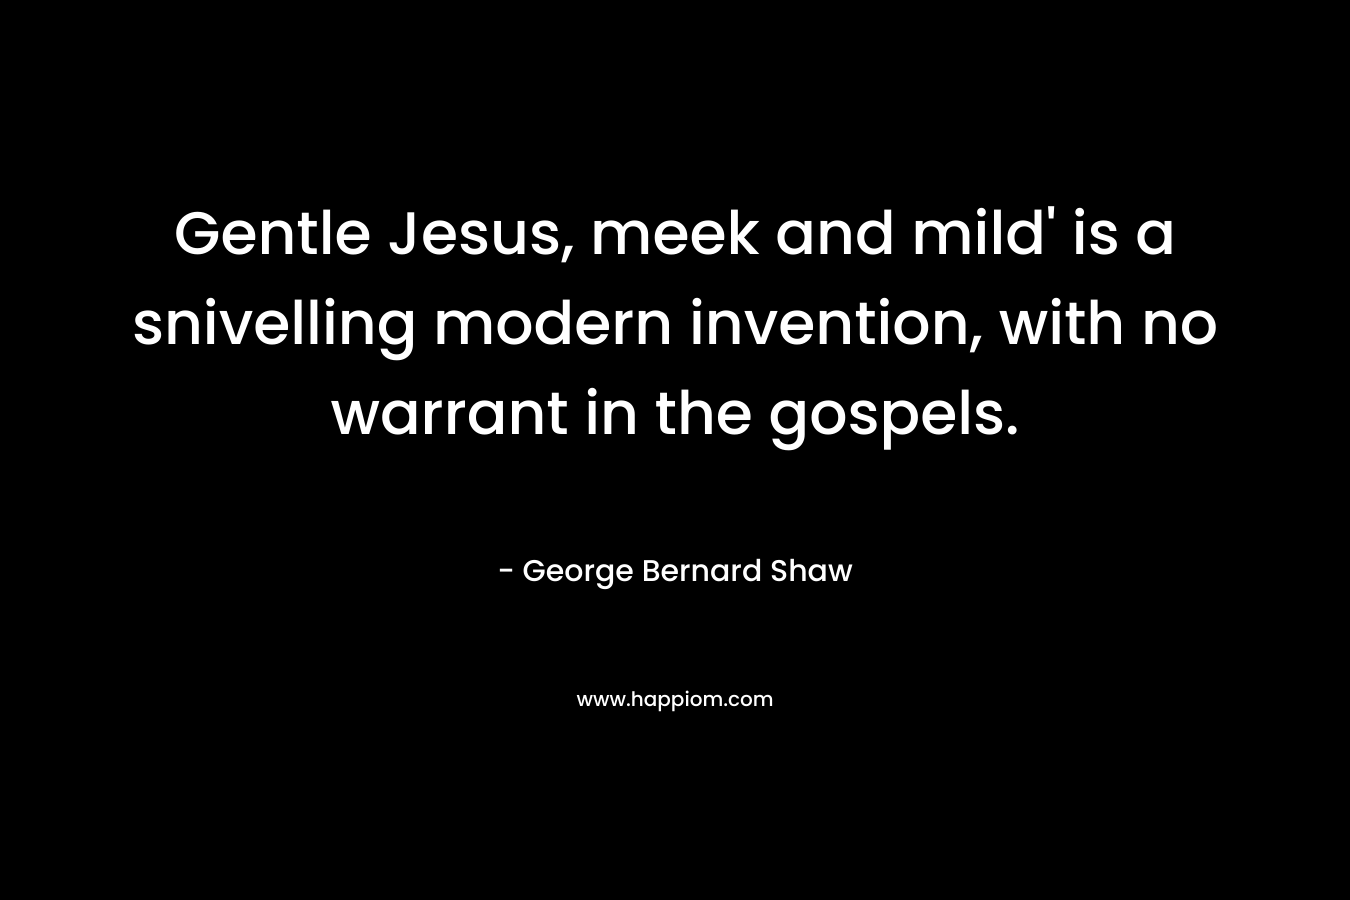 Gentle Jesus, meek and mild’ is a snivelling modern invention, with no warrant in the gospels. – George Bernard Shaw